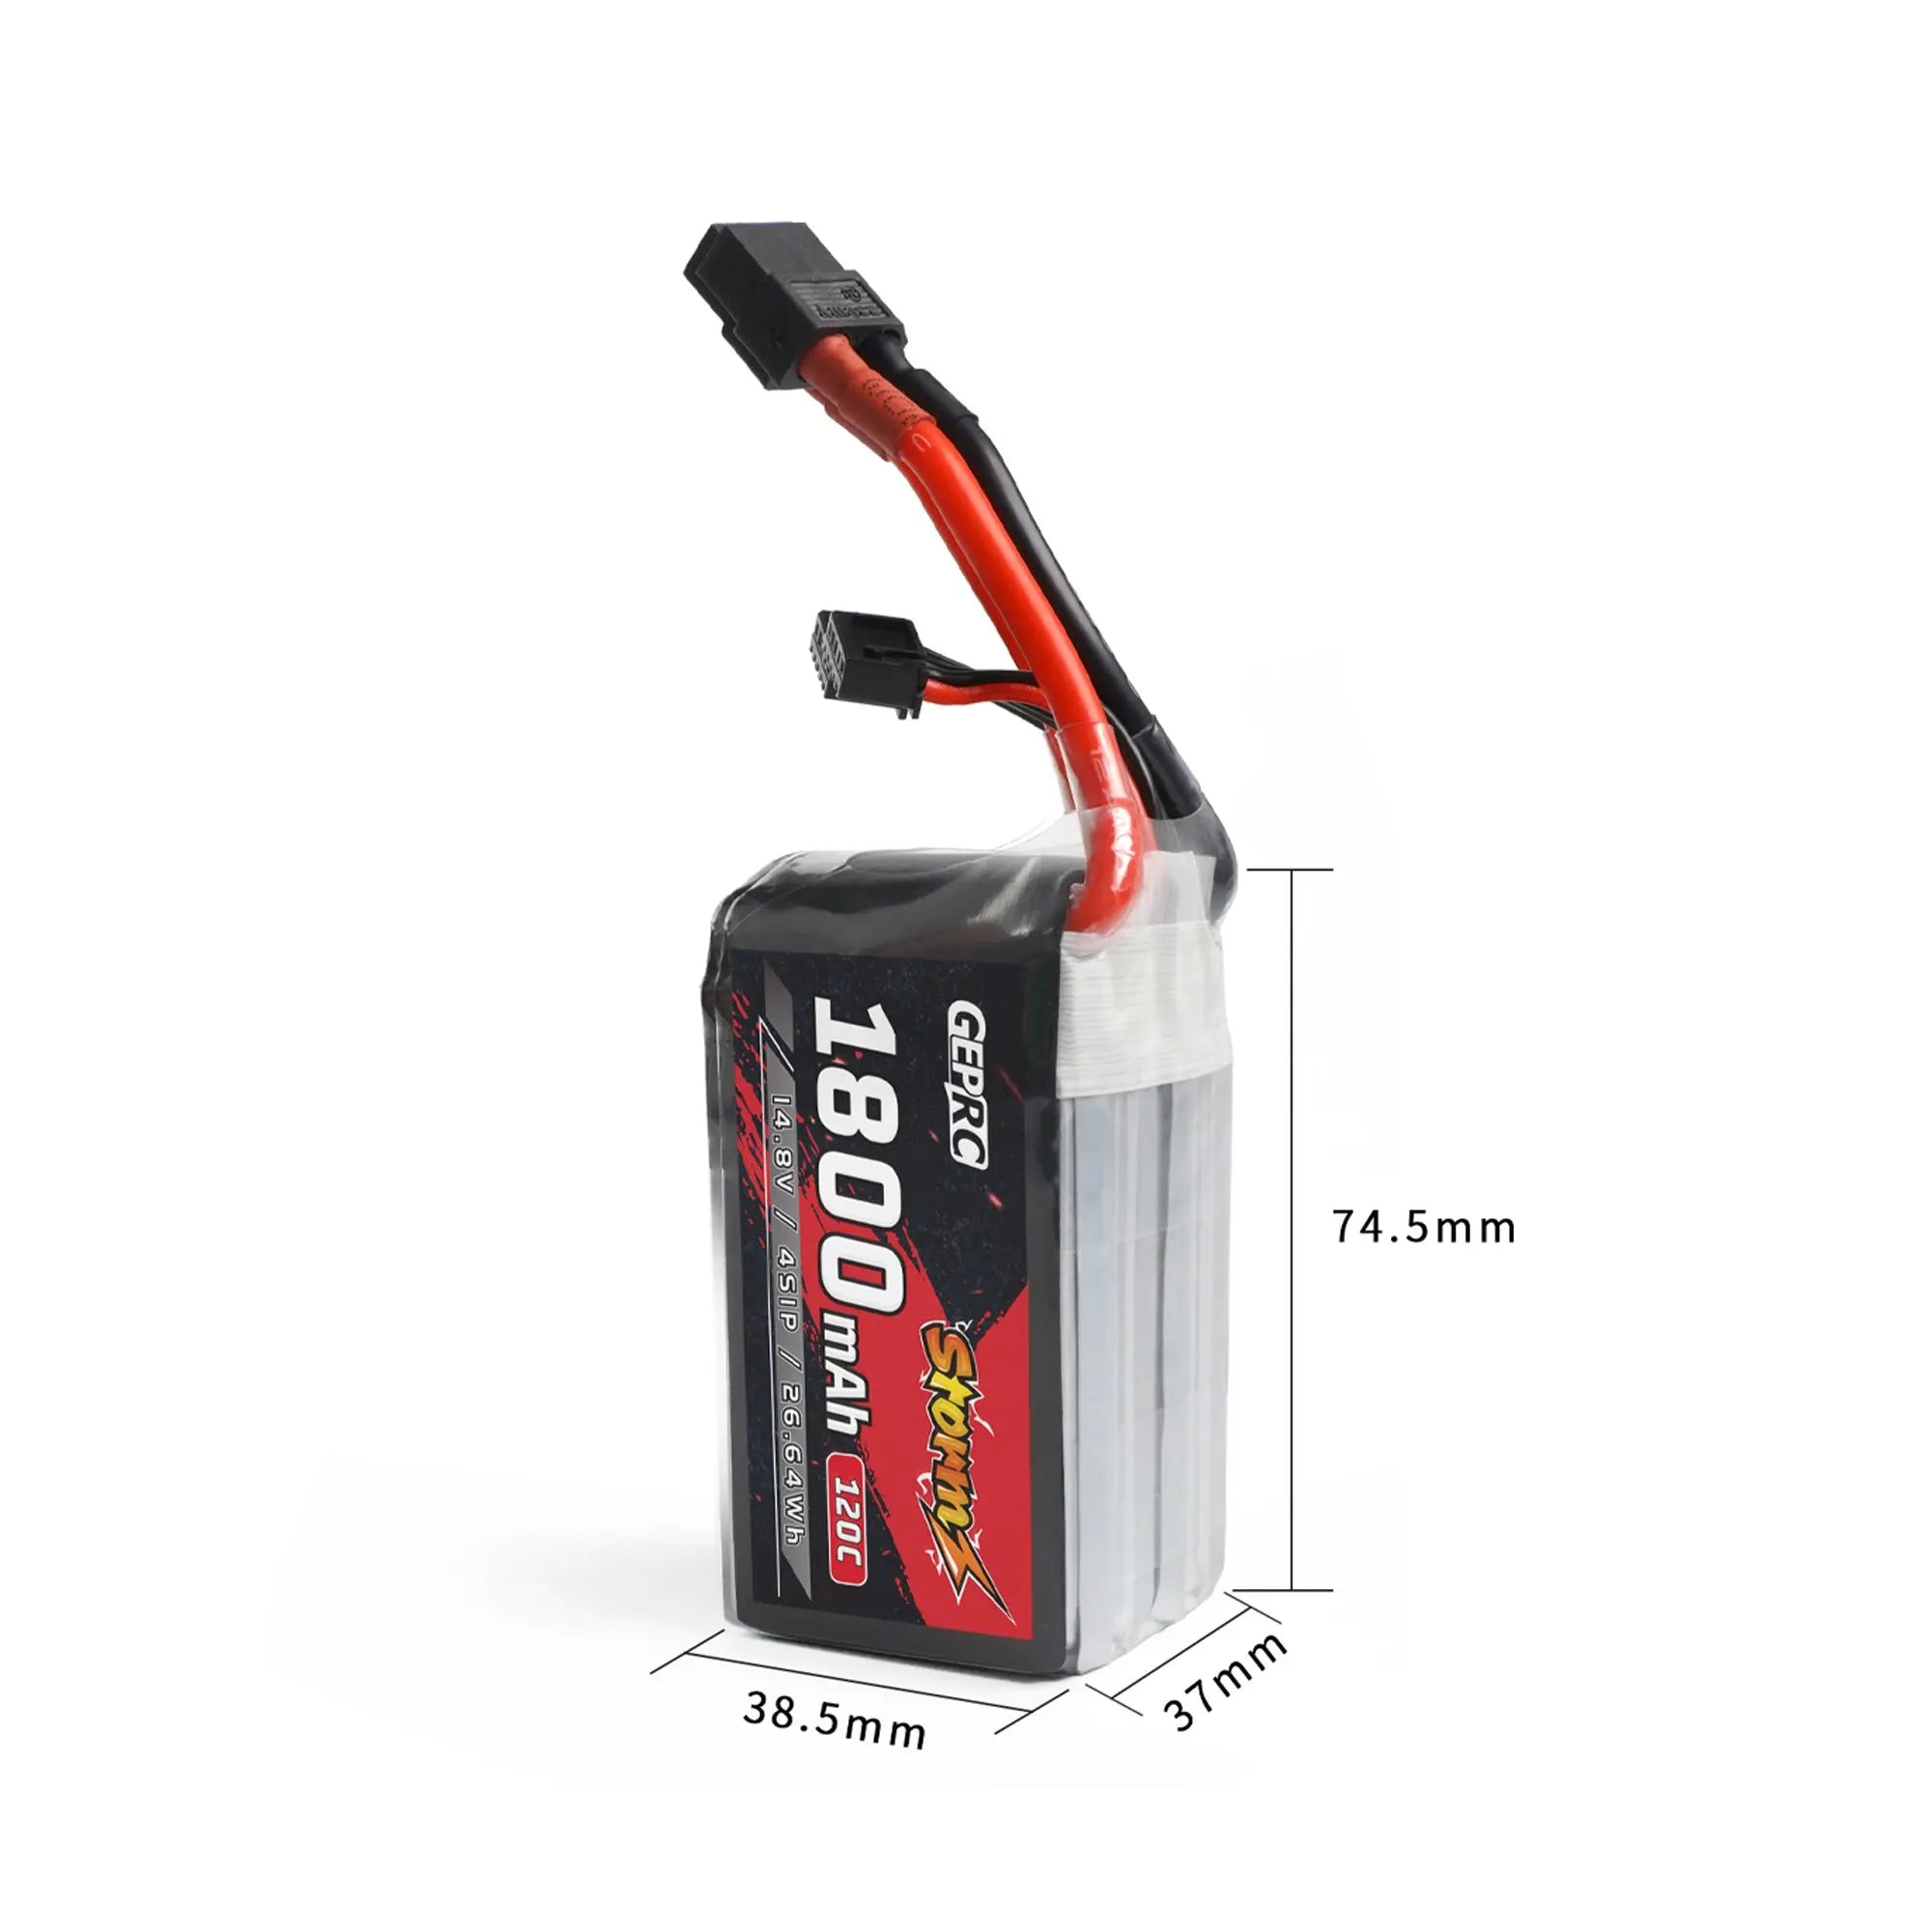 GEPRC Storm 4S 1800mAh 120C Lipo Battery, GEPRC Storm battery uses safe and stable cell formula, superb pairing process, flat appearance,